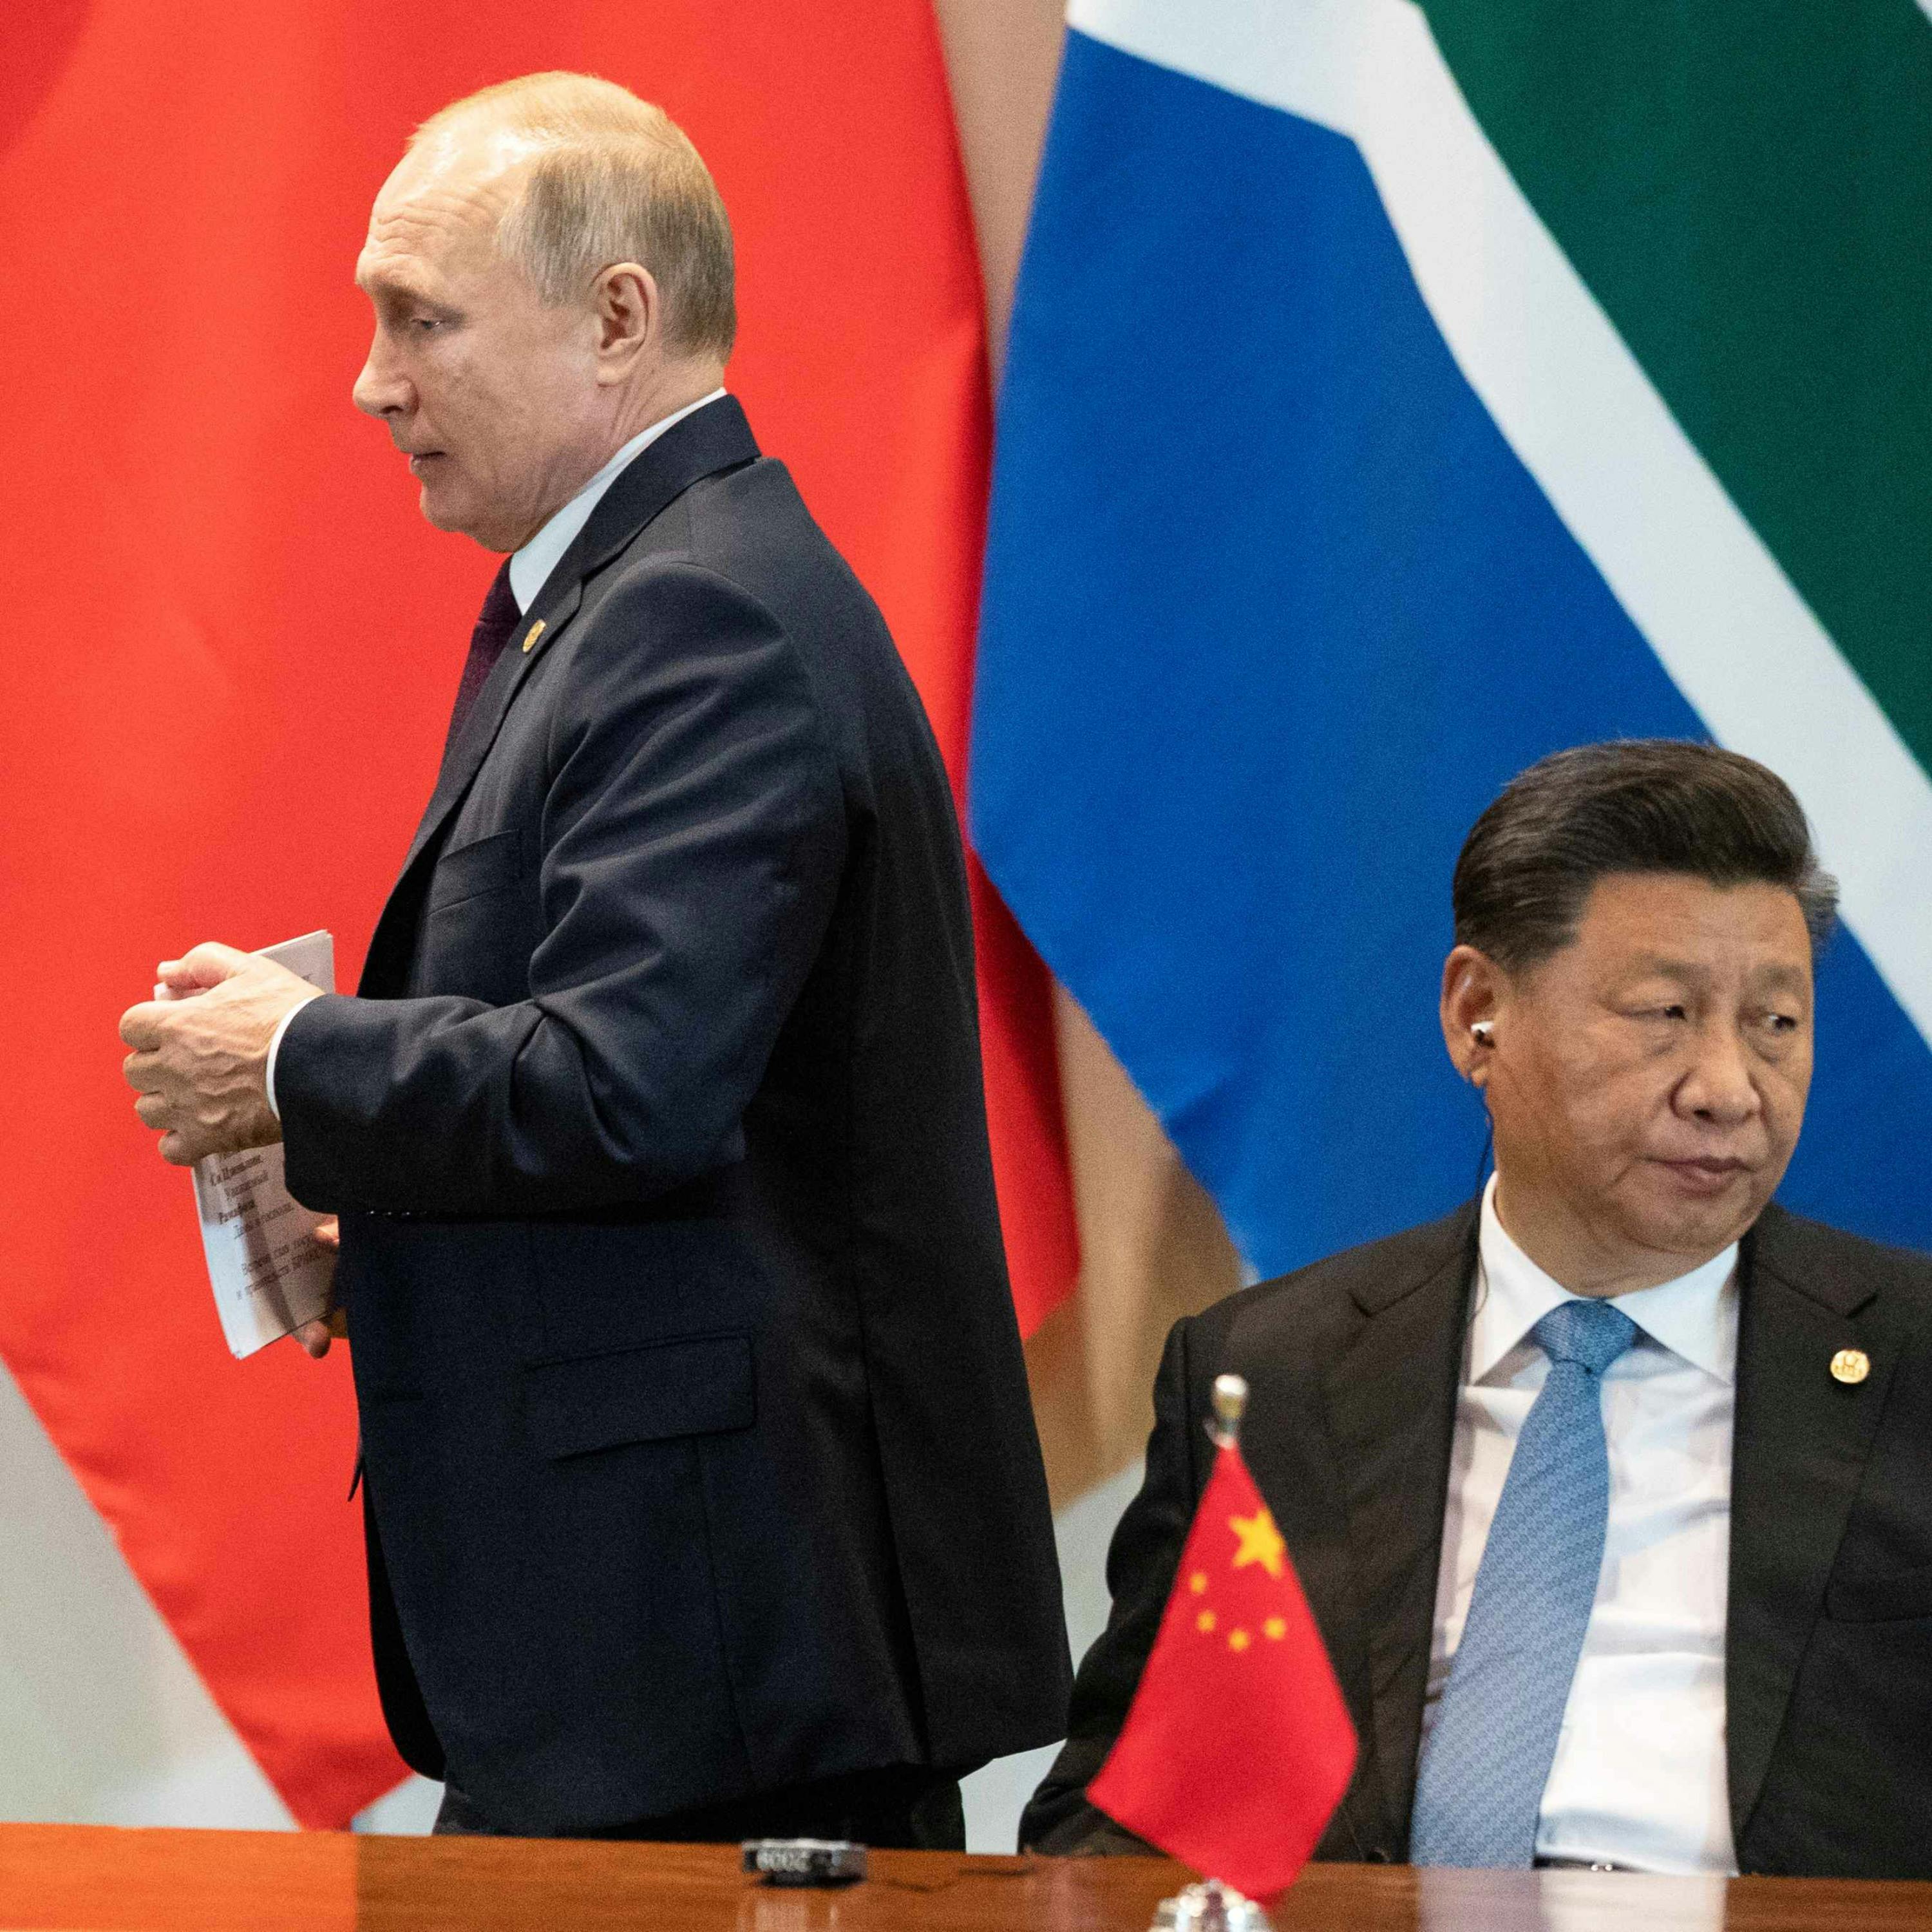 Xi-Putin Relations and the view from Riga